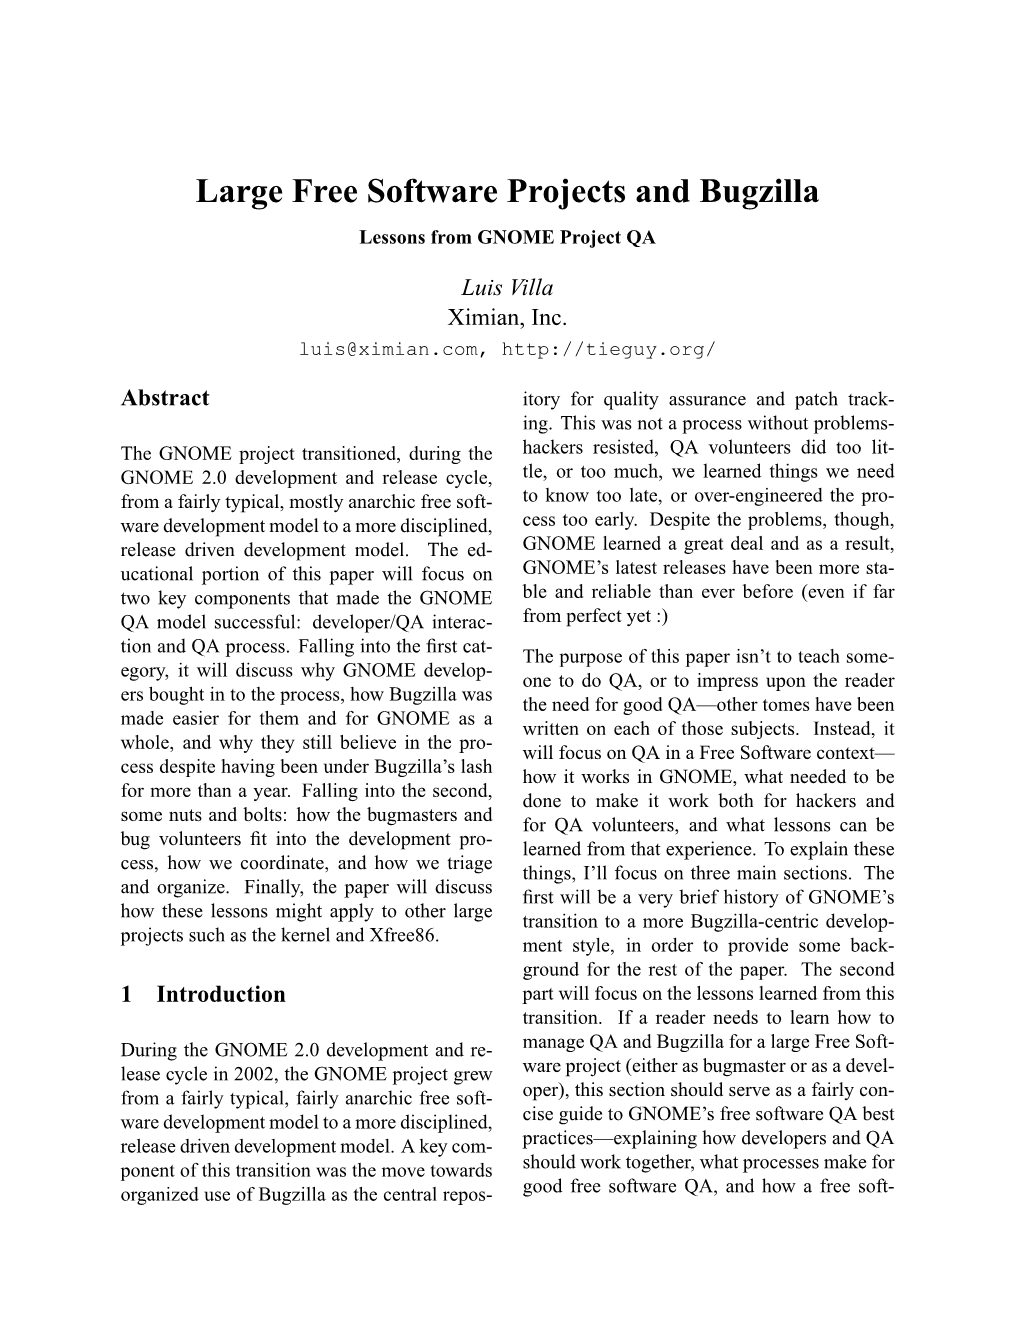 Large Free Software Projects and Bugzilla Lessons from GNOME Project QA